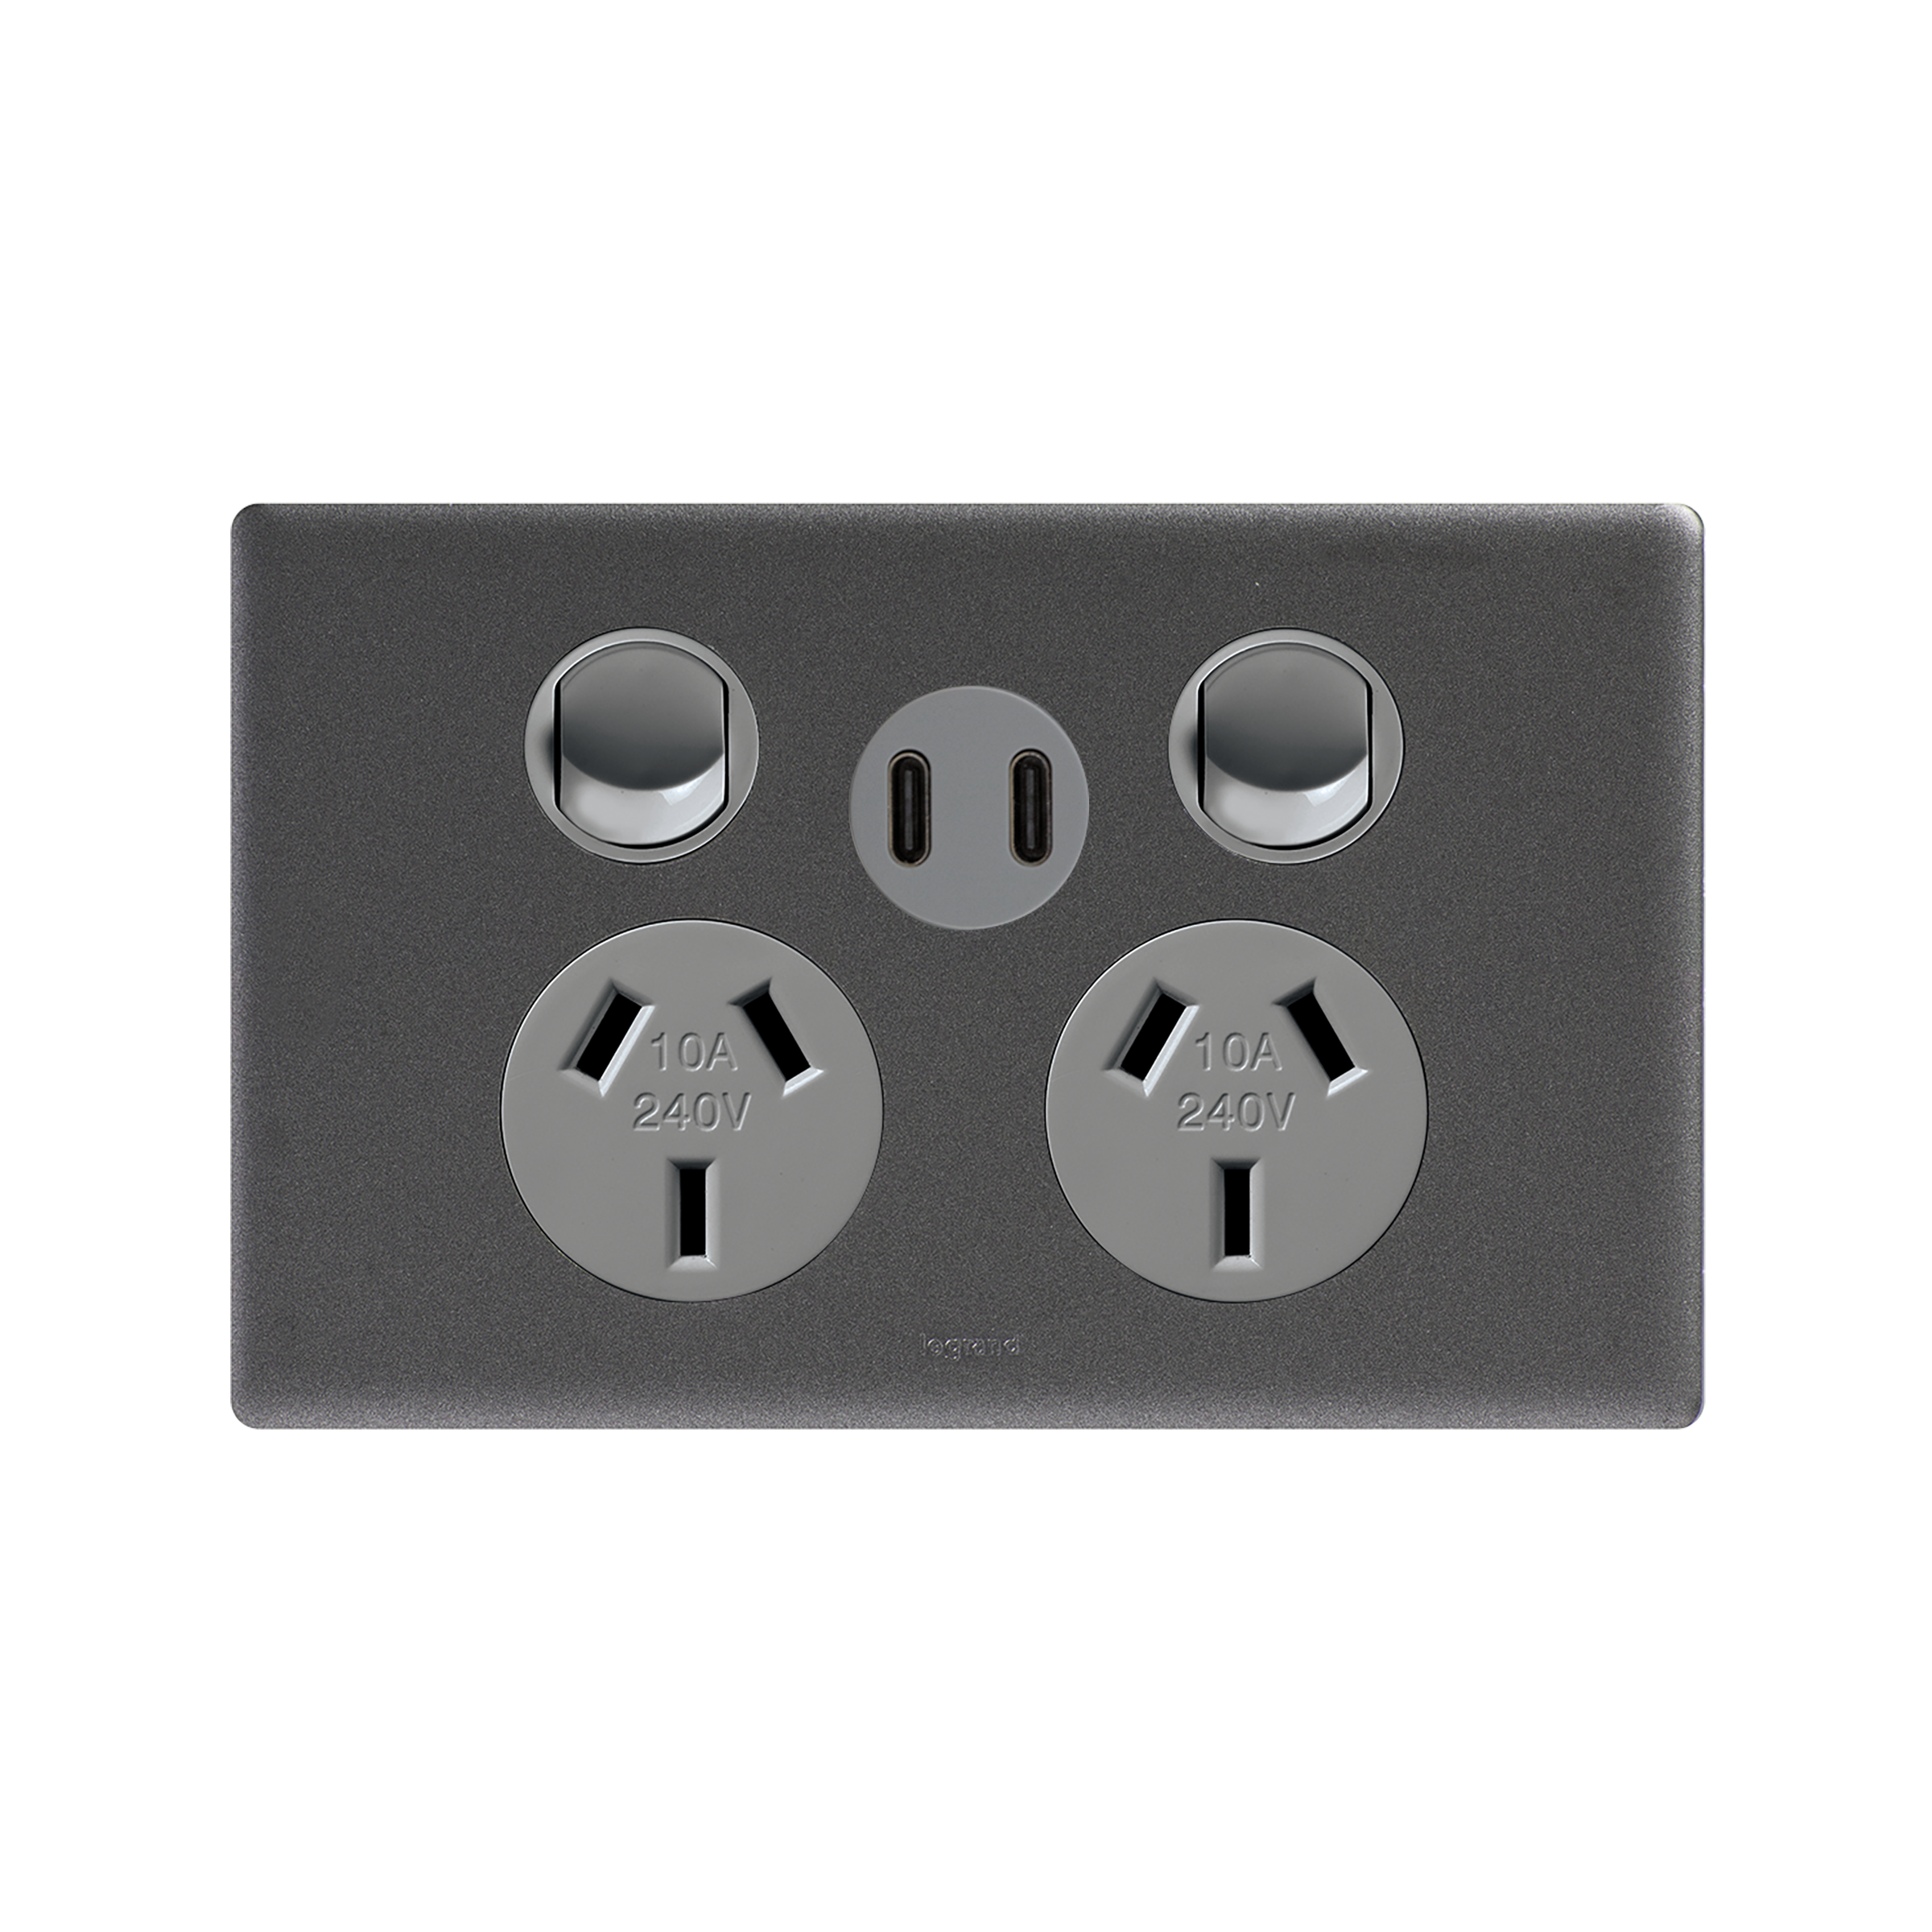 EXCEL LIFE DGPO 10A WITH USB CHARGER TYPE C+C 3A URBAN GREY